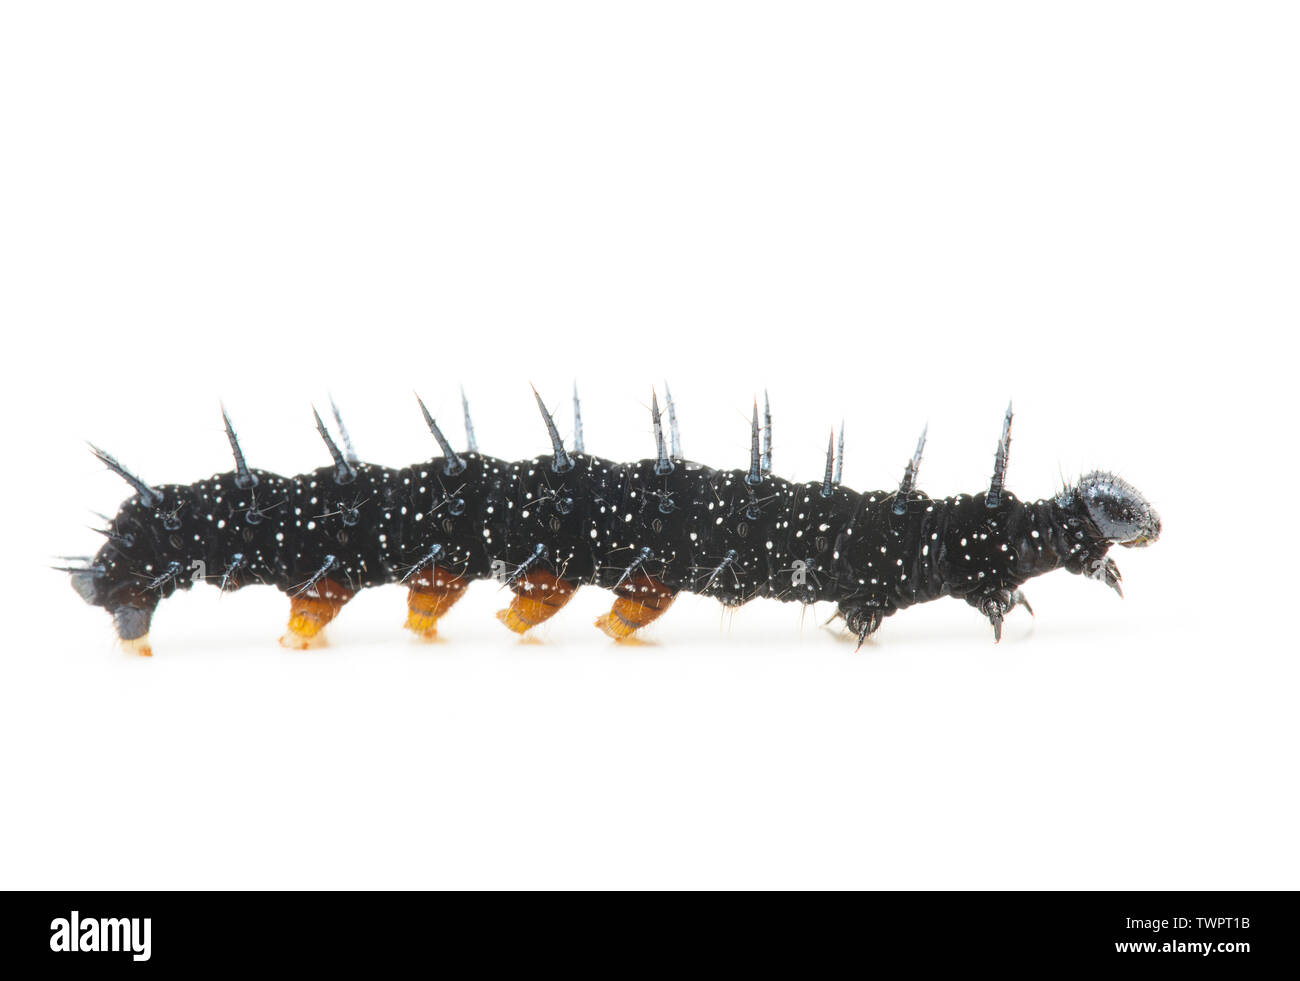 The larva of a peacock butterfly, Aglais io, photographed in a studio on a white background. They feed on nettles and this one was found on the margin Stock Photo